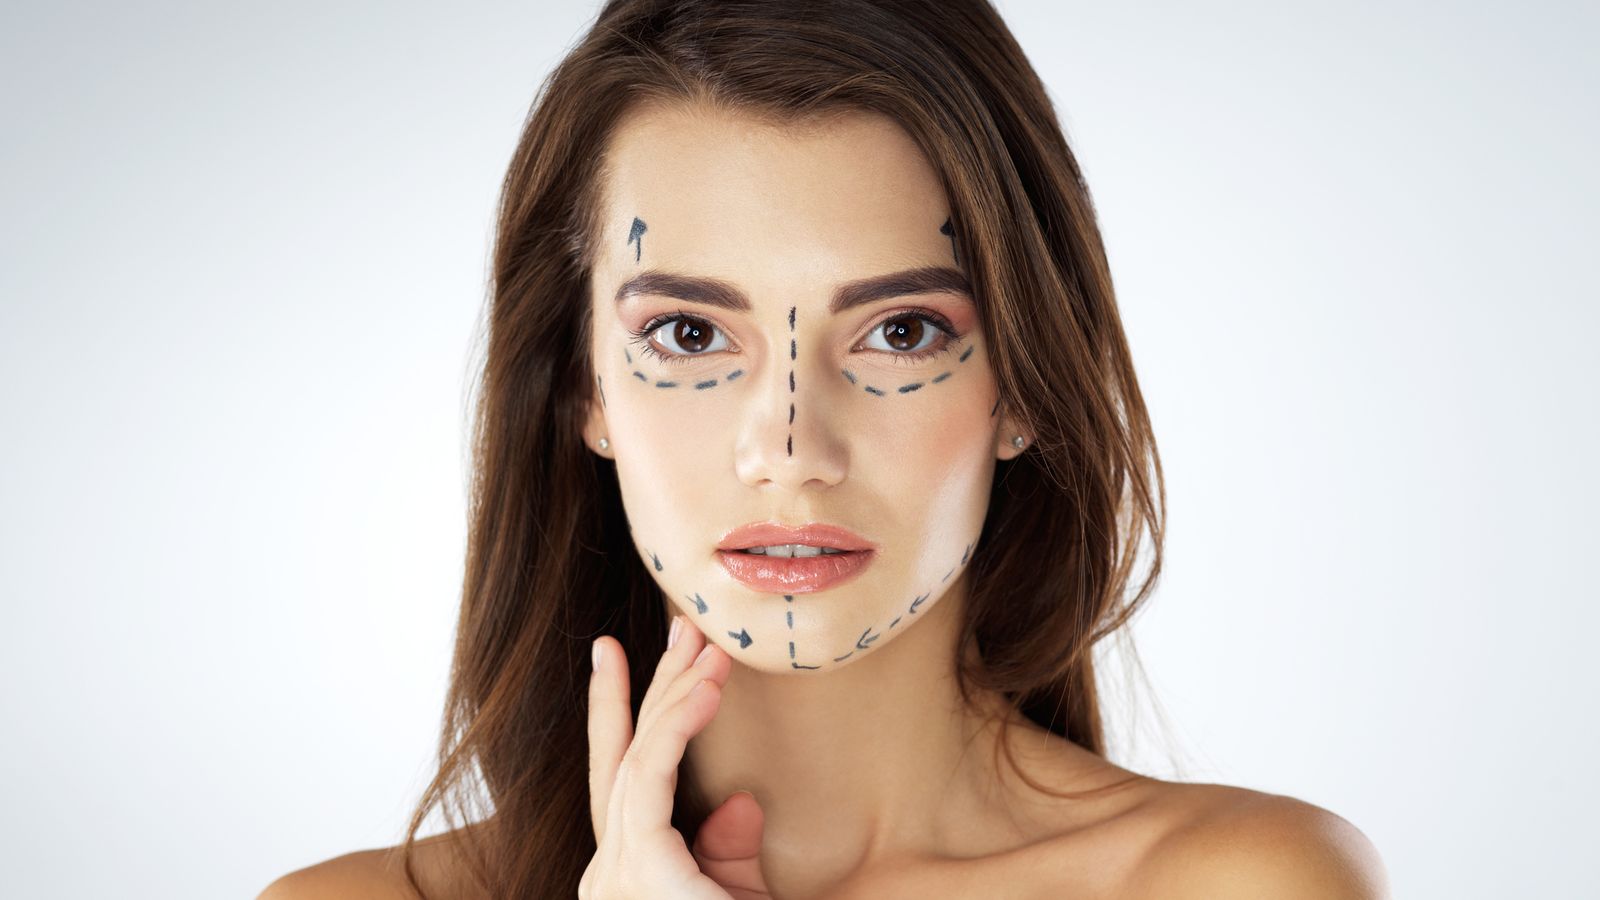 Cosmetic surgery adverts targeting teenagers banned